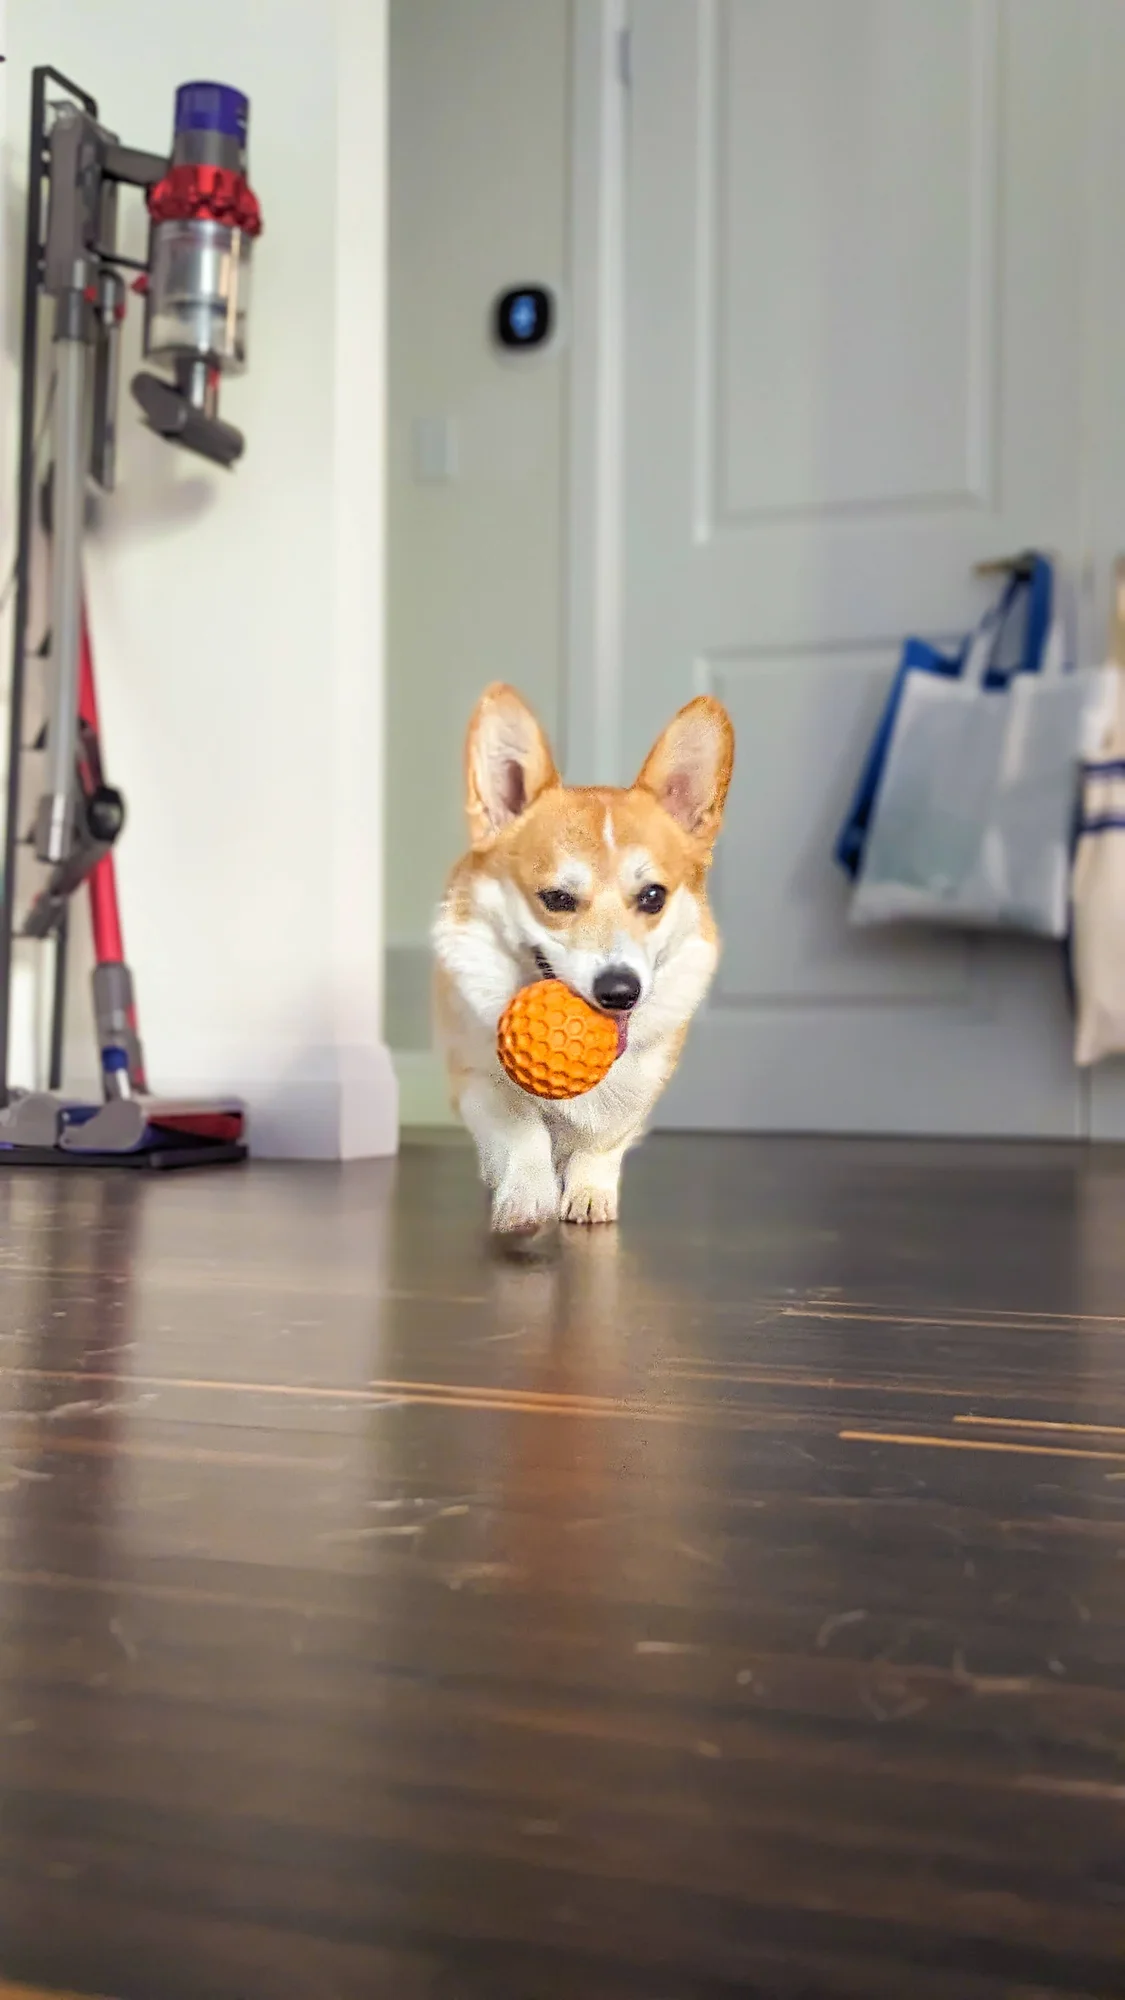 A photo of a corgi walking toward the camera with a ball in its mouth.